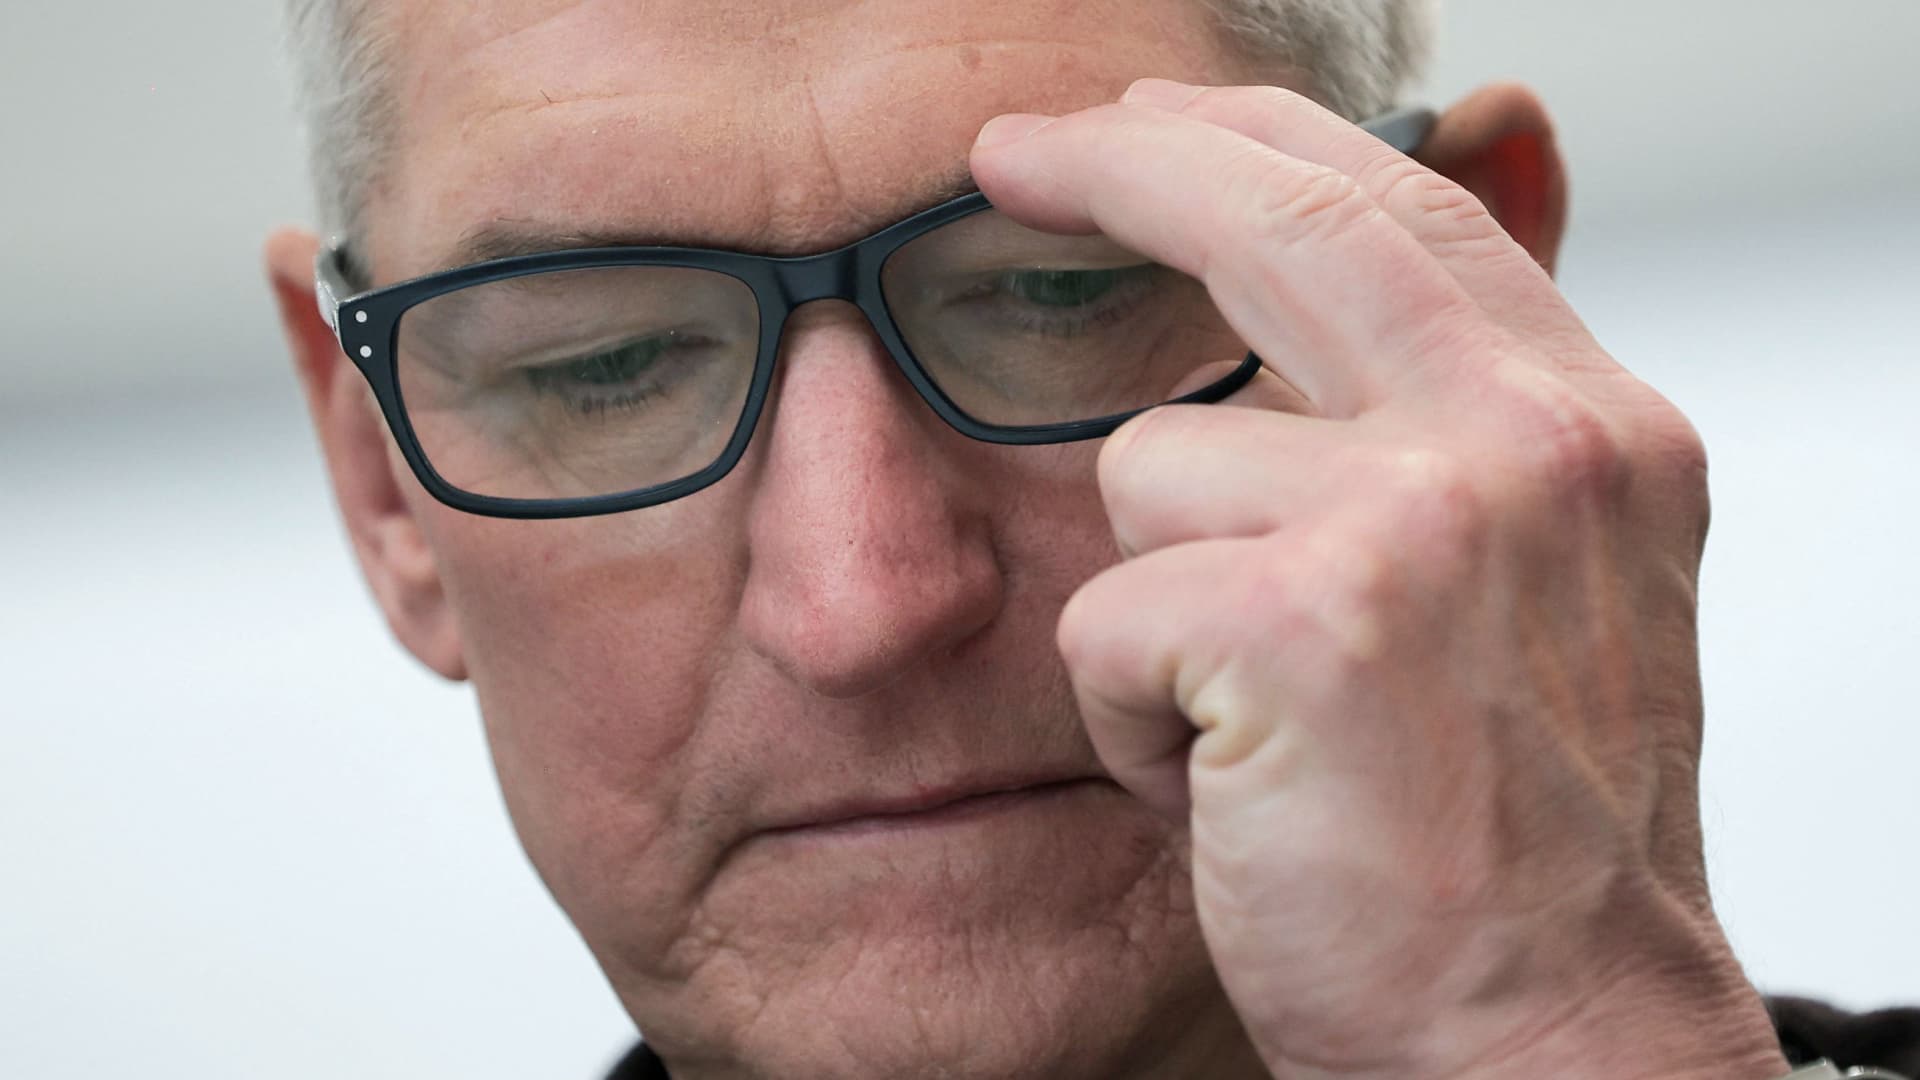 Apple execs were reportedly skeptical on headset, with one likening it to a 'science project' 